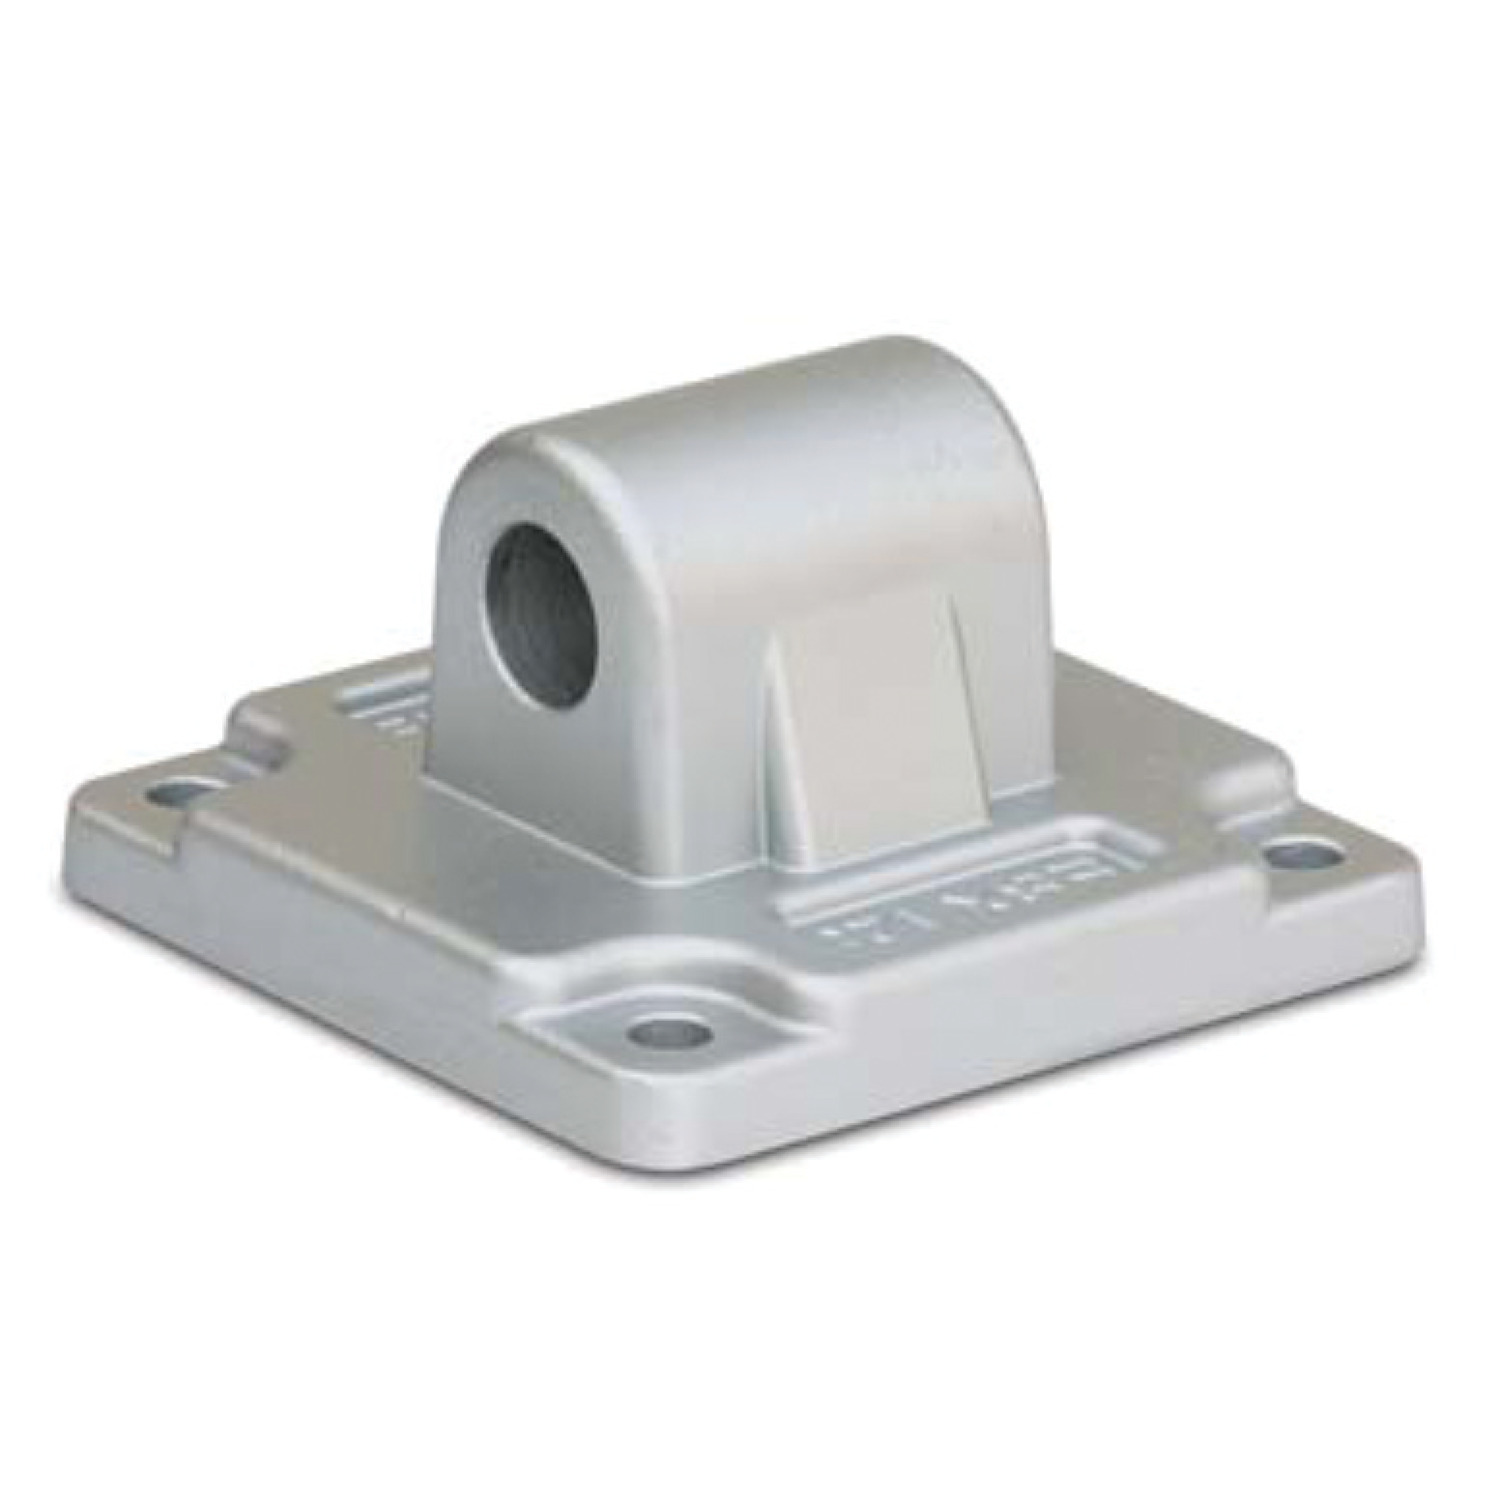 Product L4818, Air Cylinder Mounts - CETOP Series EBX foot mounting / 